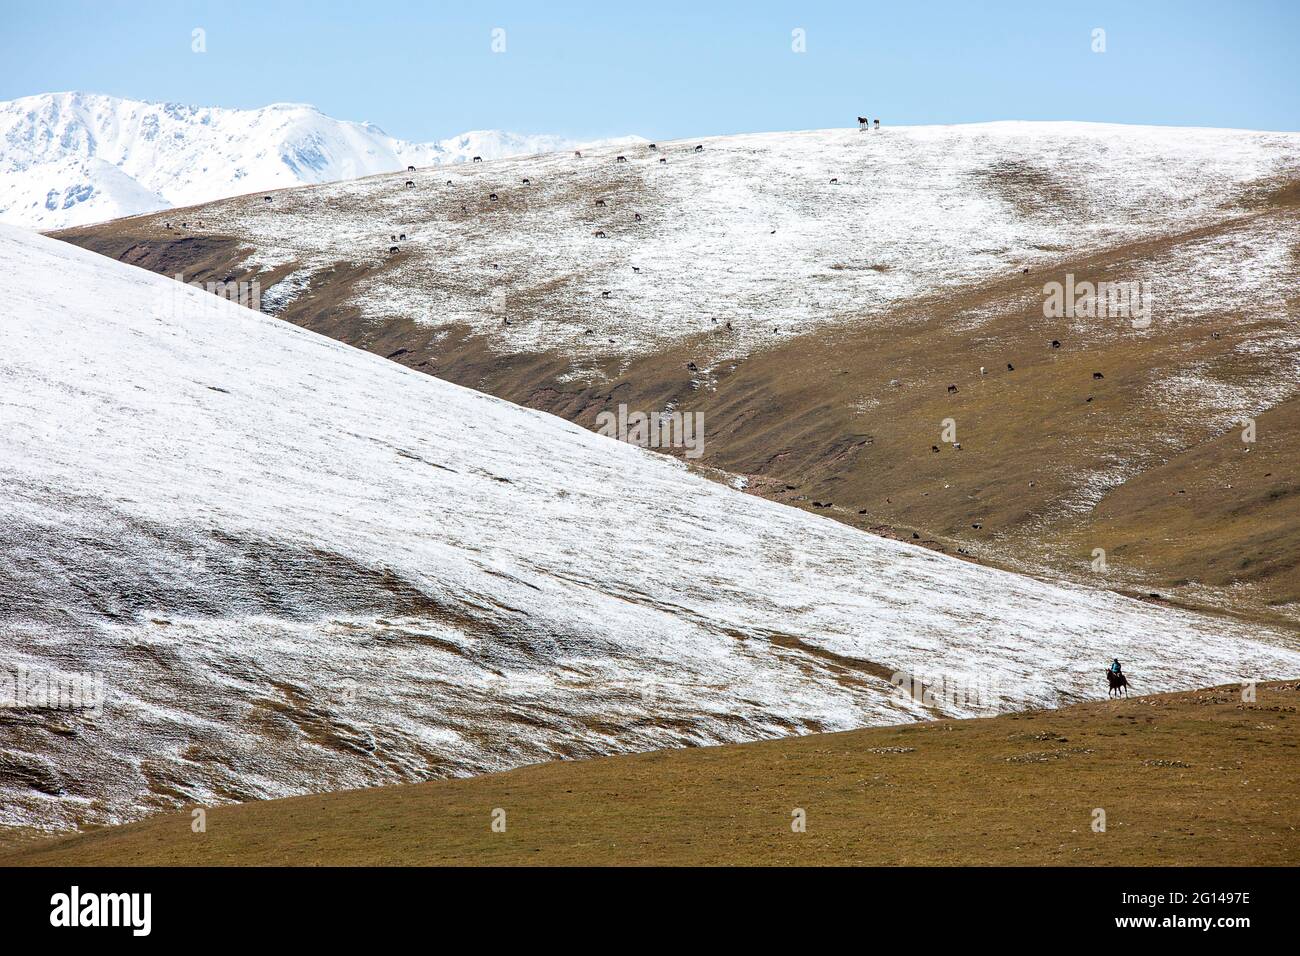 View over the Assy Plateau where the nomads go to spend the summer, near Almaty, Kazakhstan Stock Photo